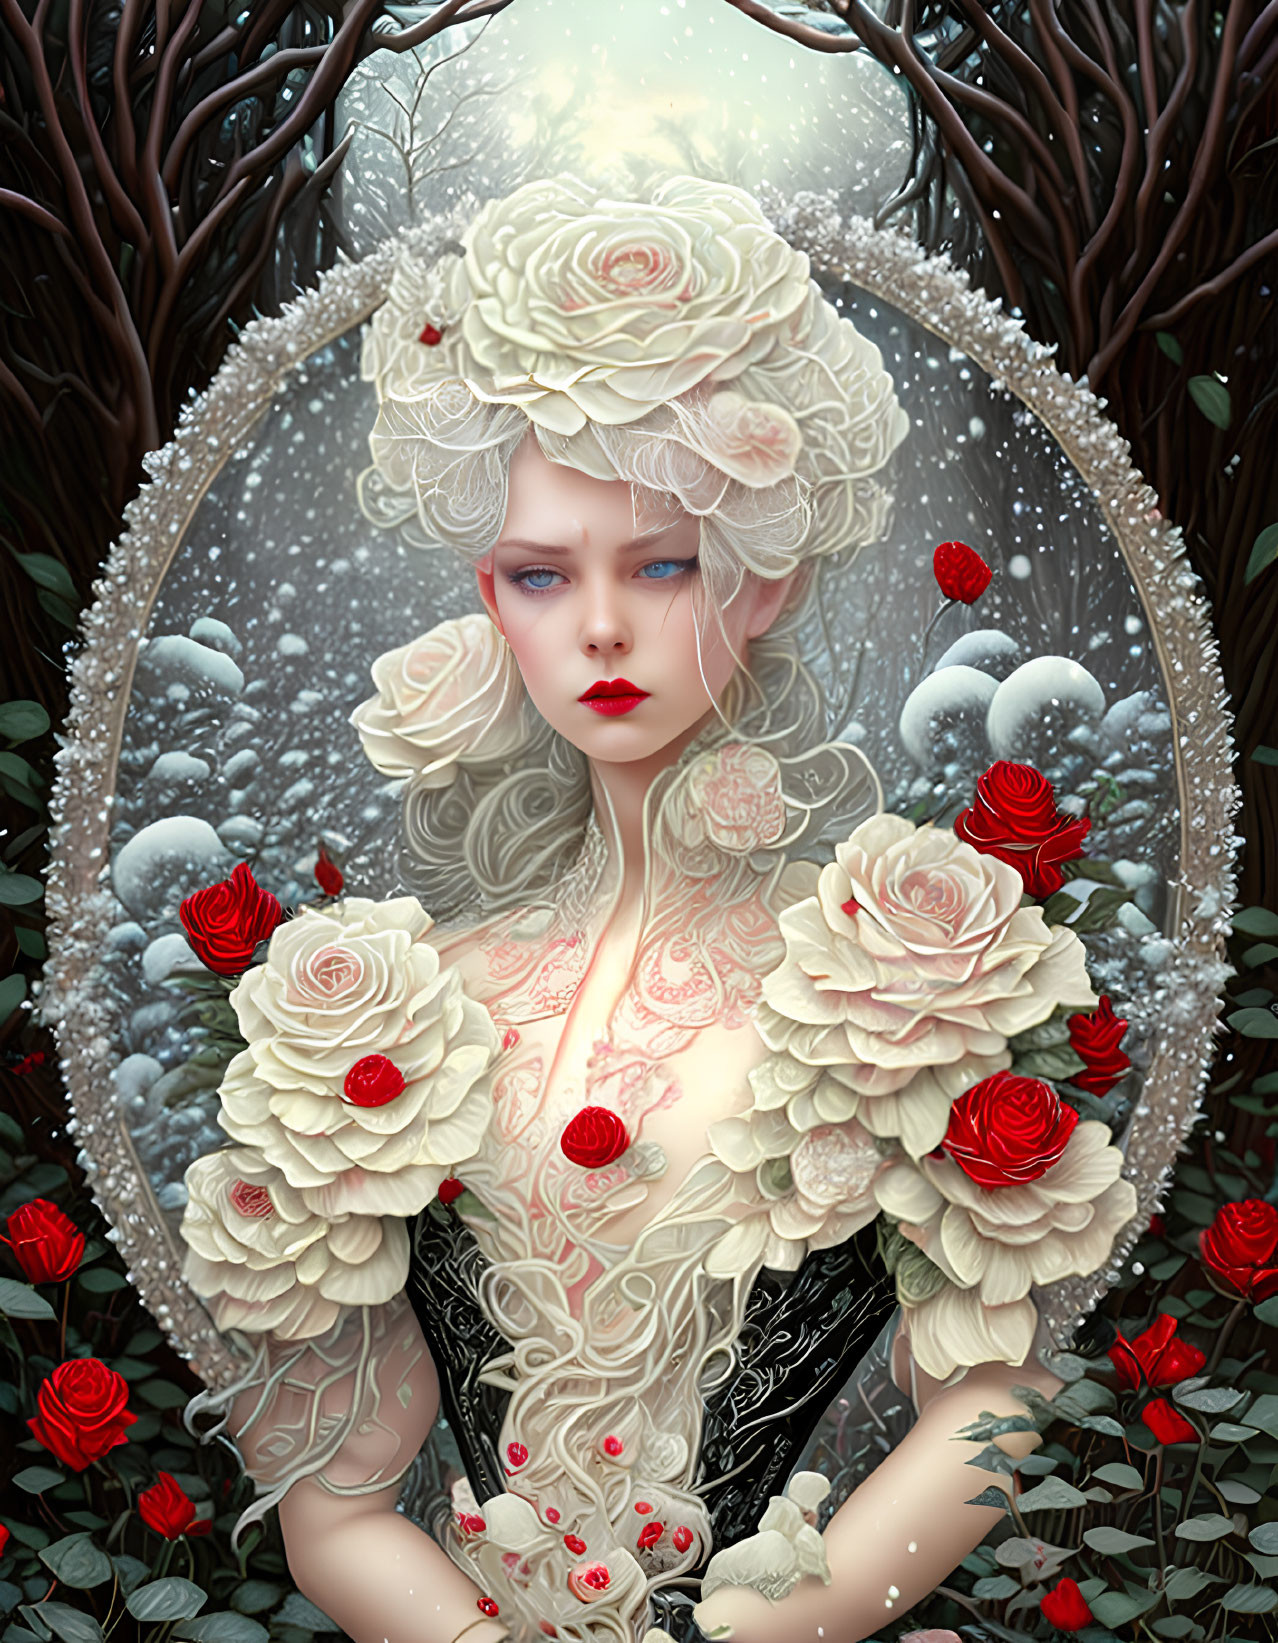 Illustrated woman with pale skin and blue eyes surrounded by roses in a floral frame.